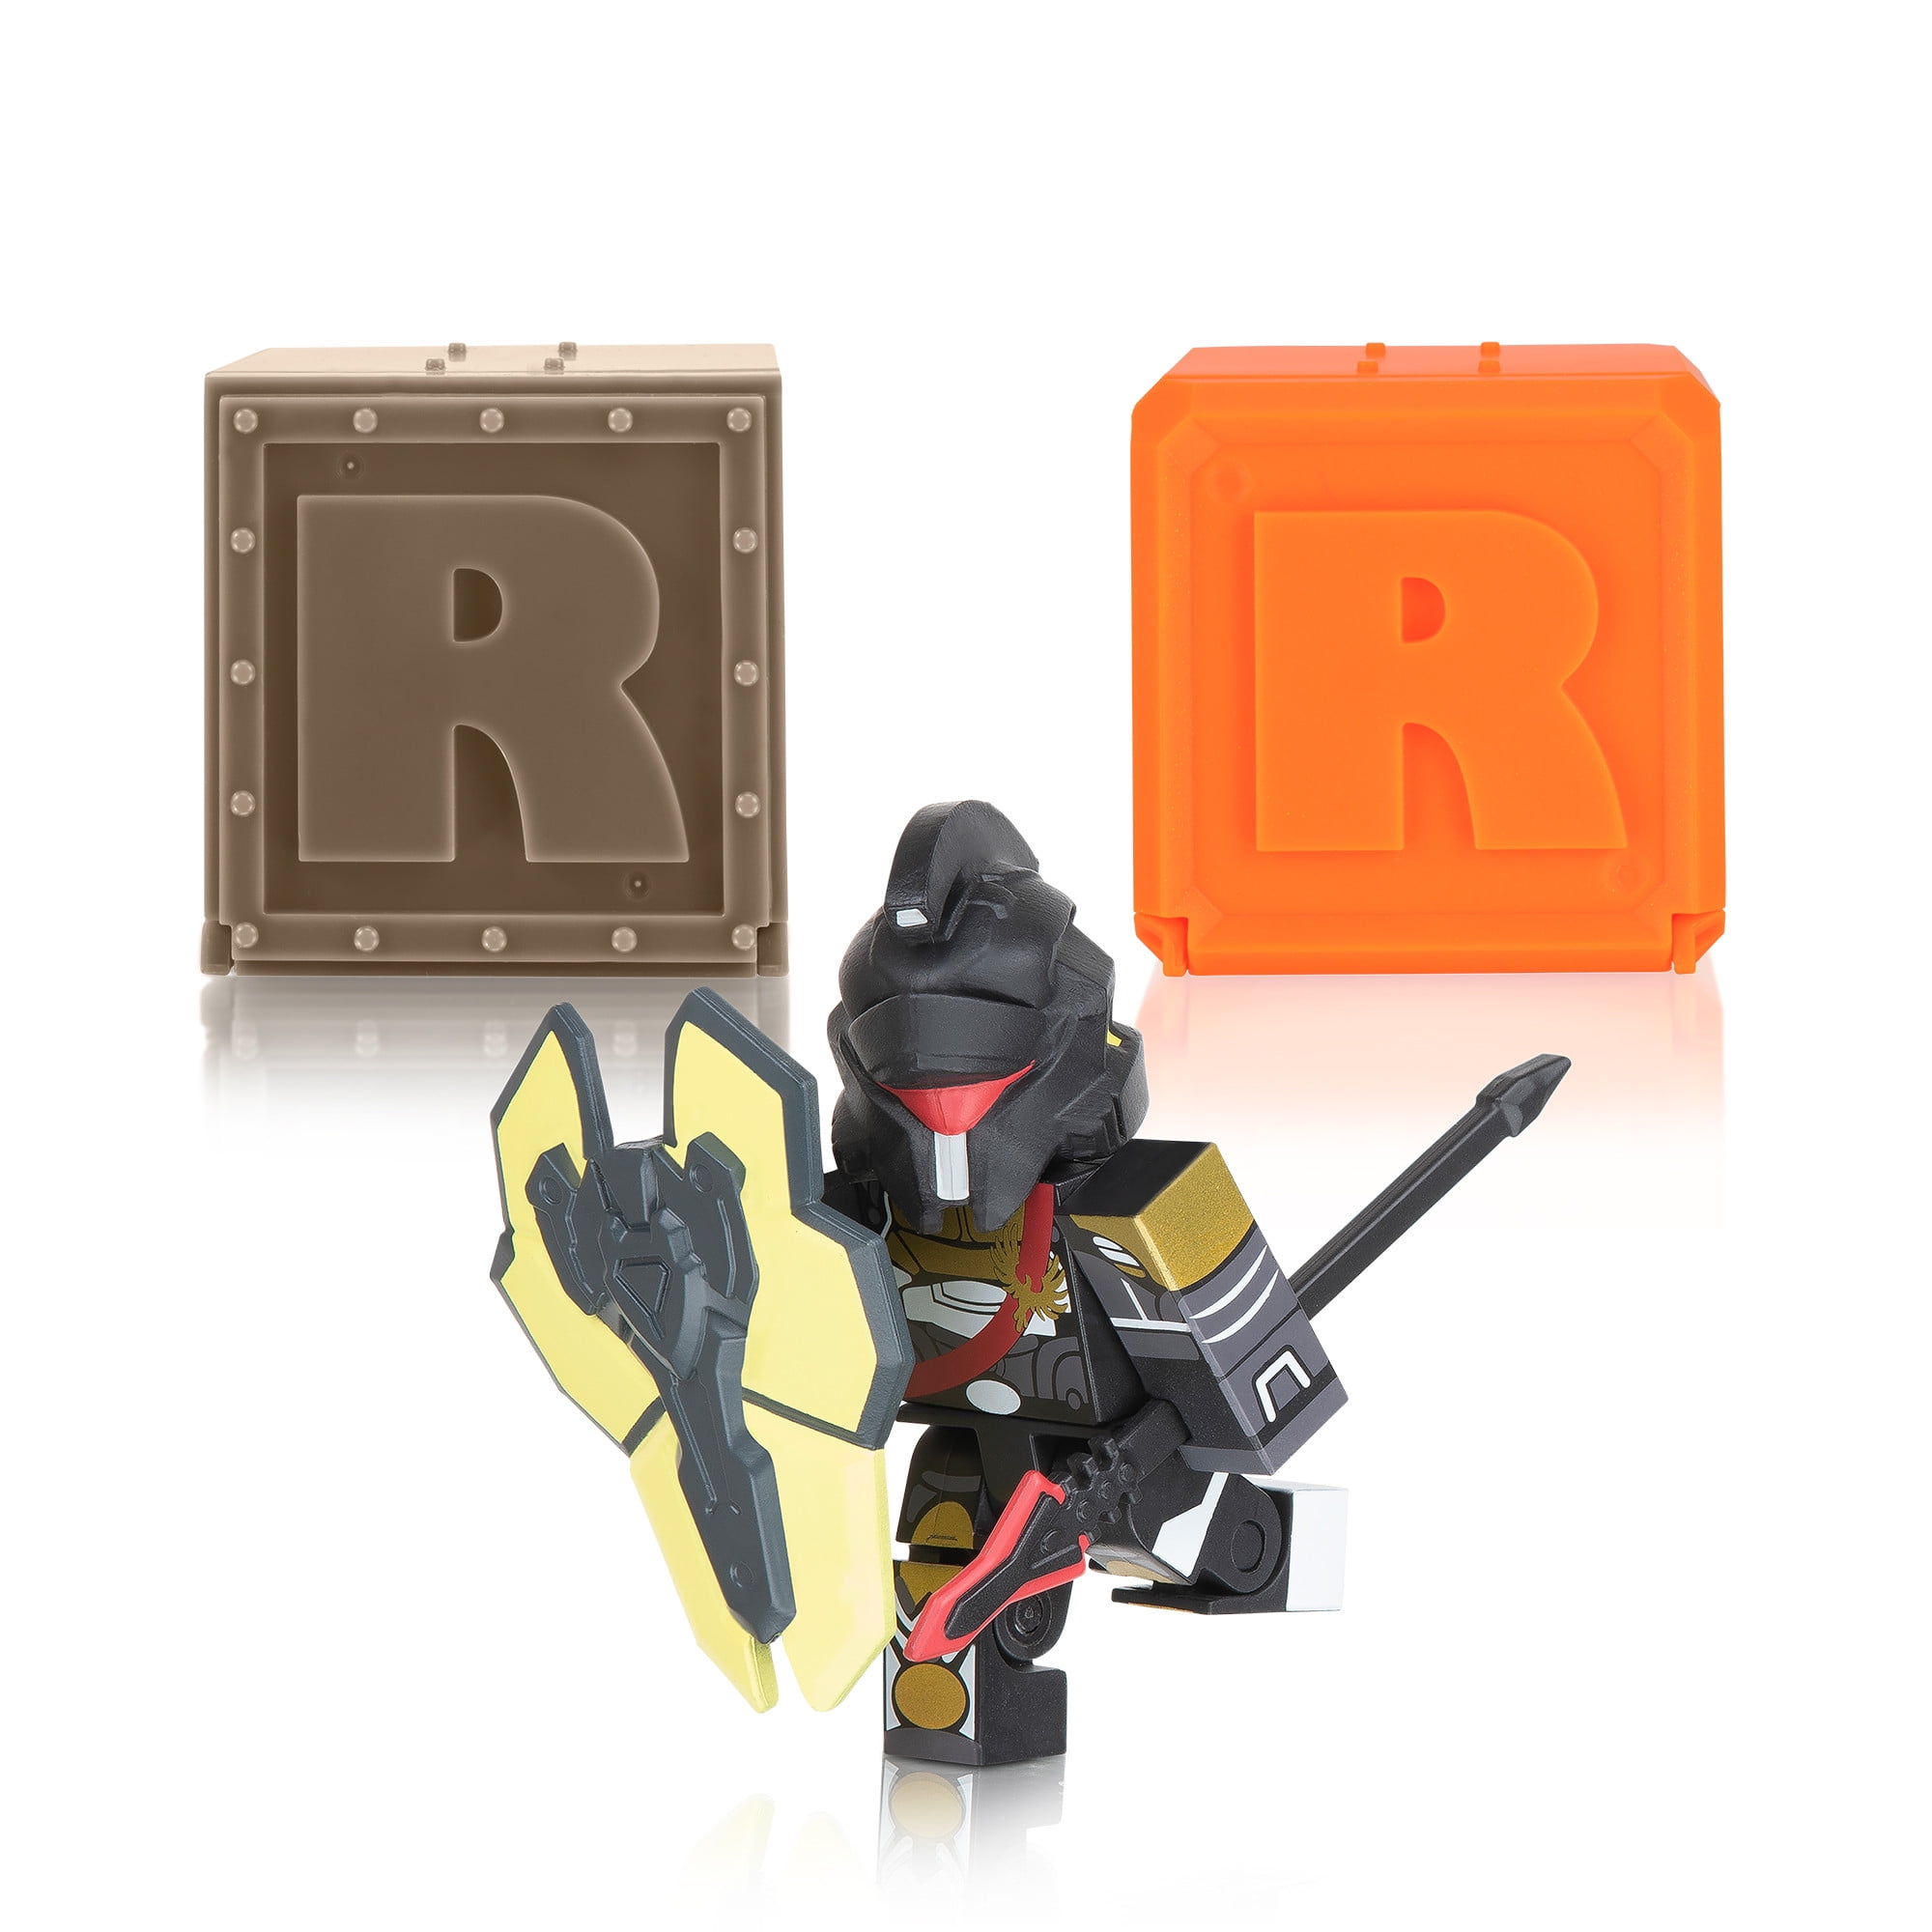 Roblox Face Code YOU PICK Ready To Redeem Avatar Virtual Item Accessory